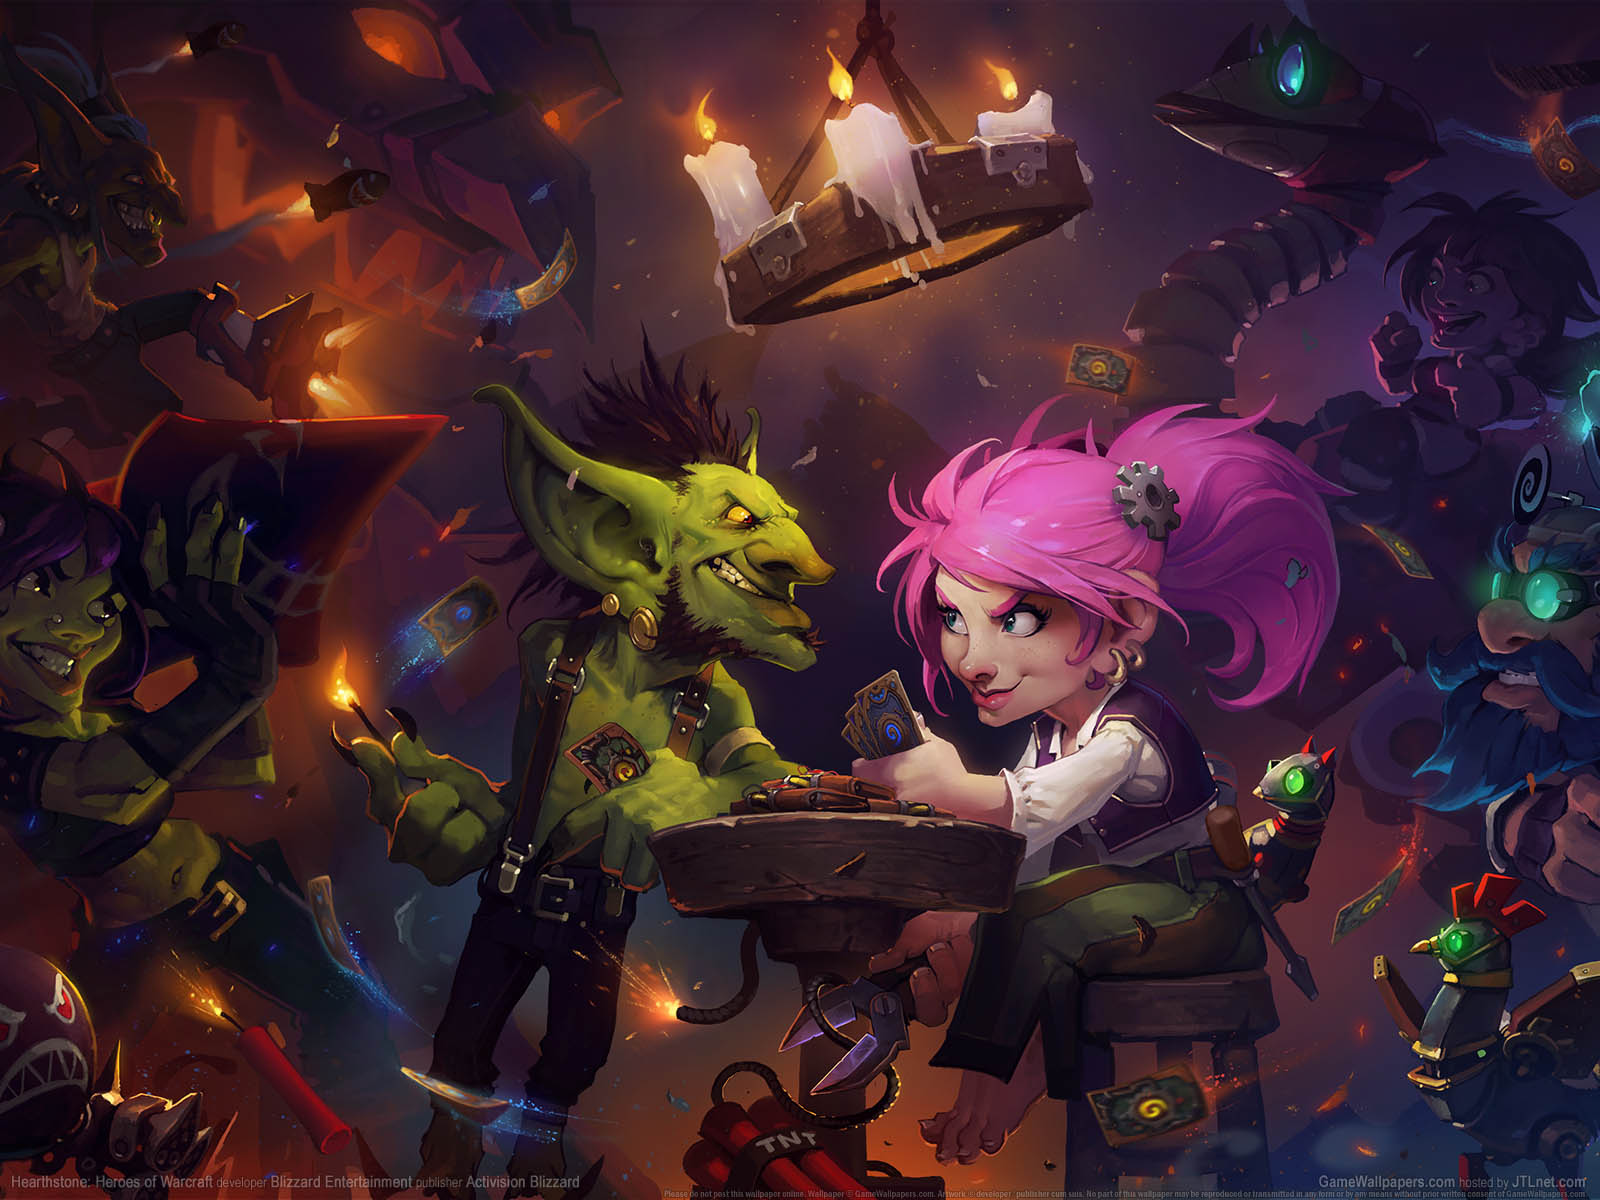 Hearthstone%3A Heroes of Warcraft achtergrond 10 1600x1200